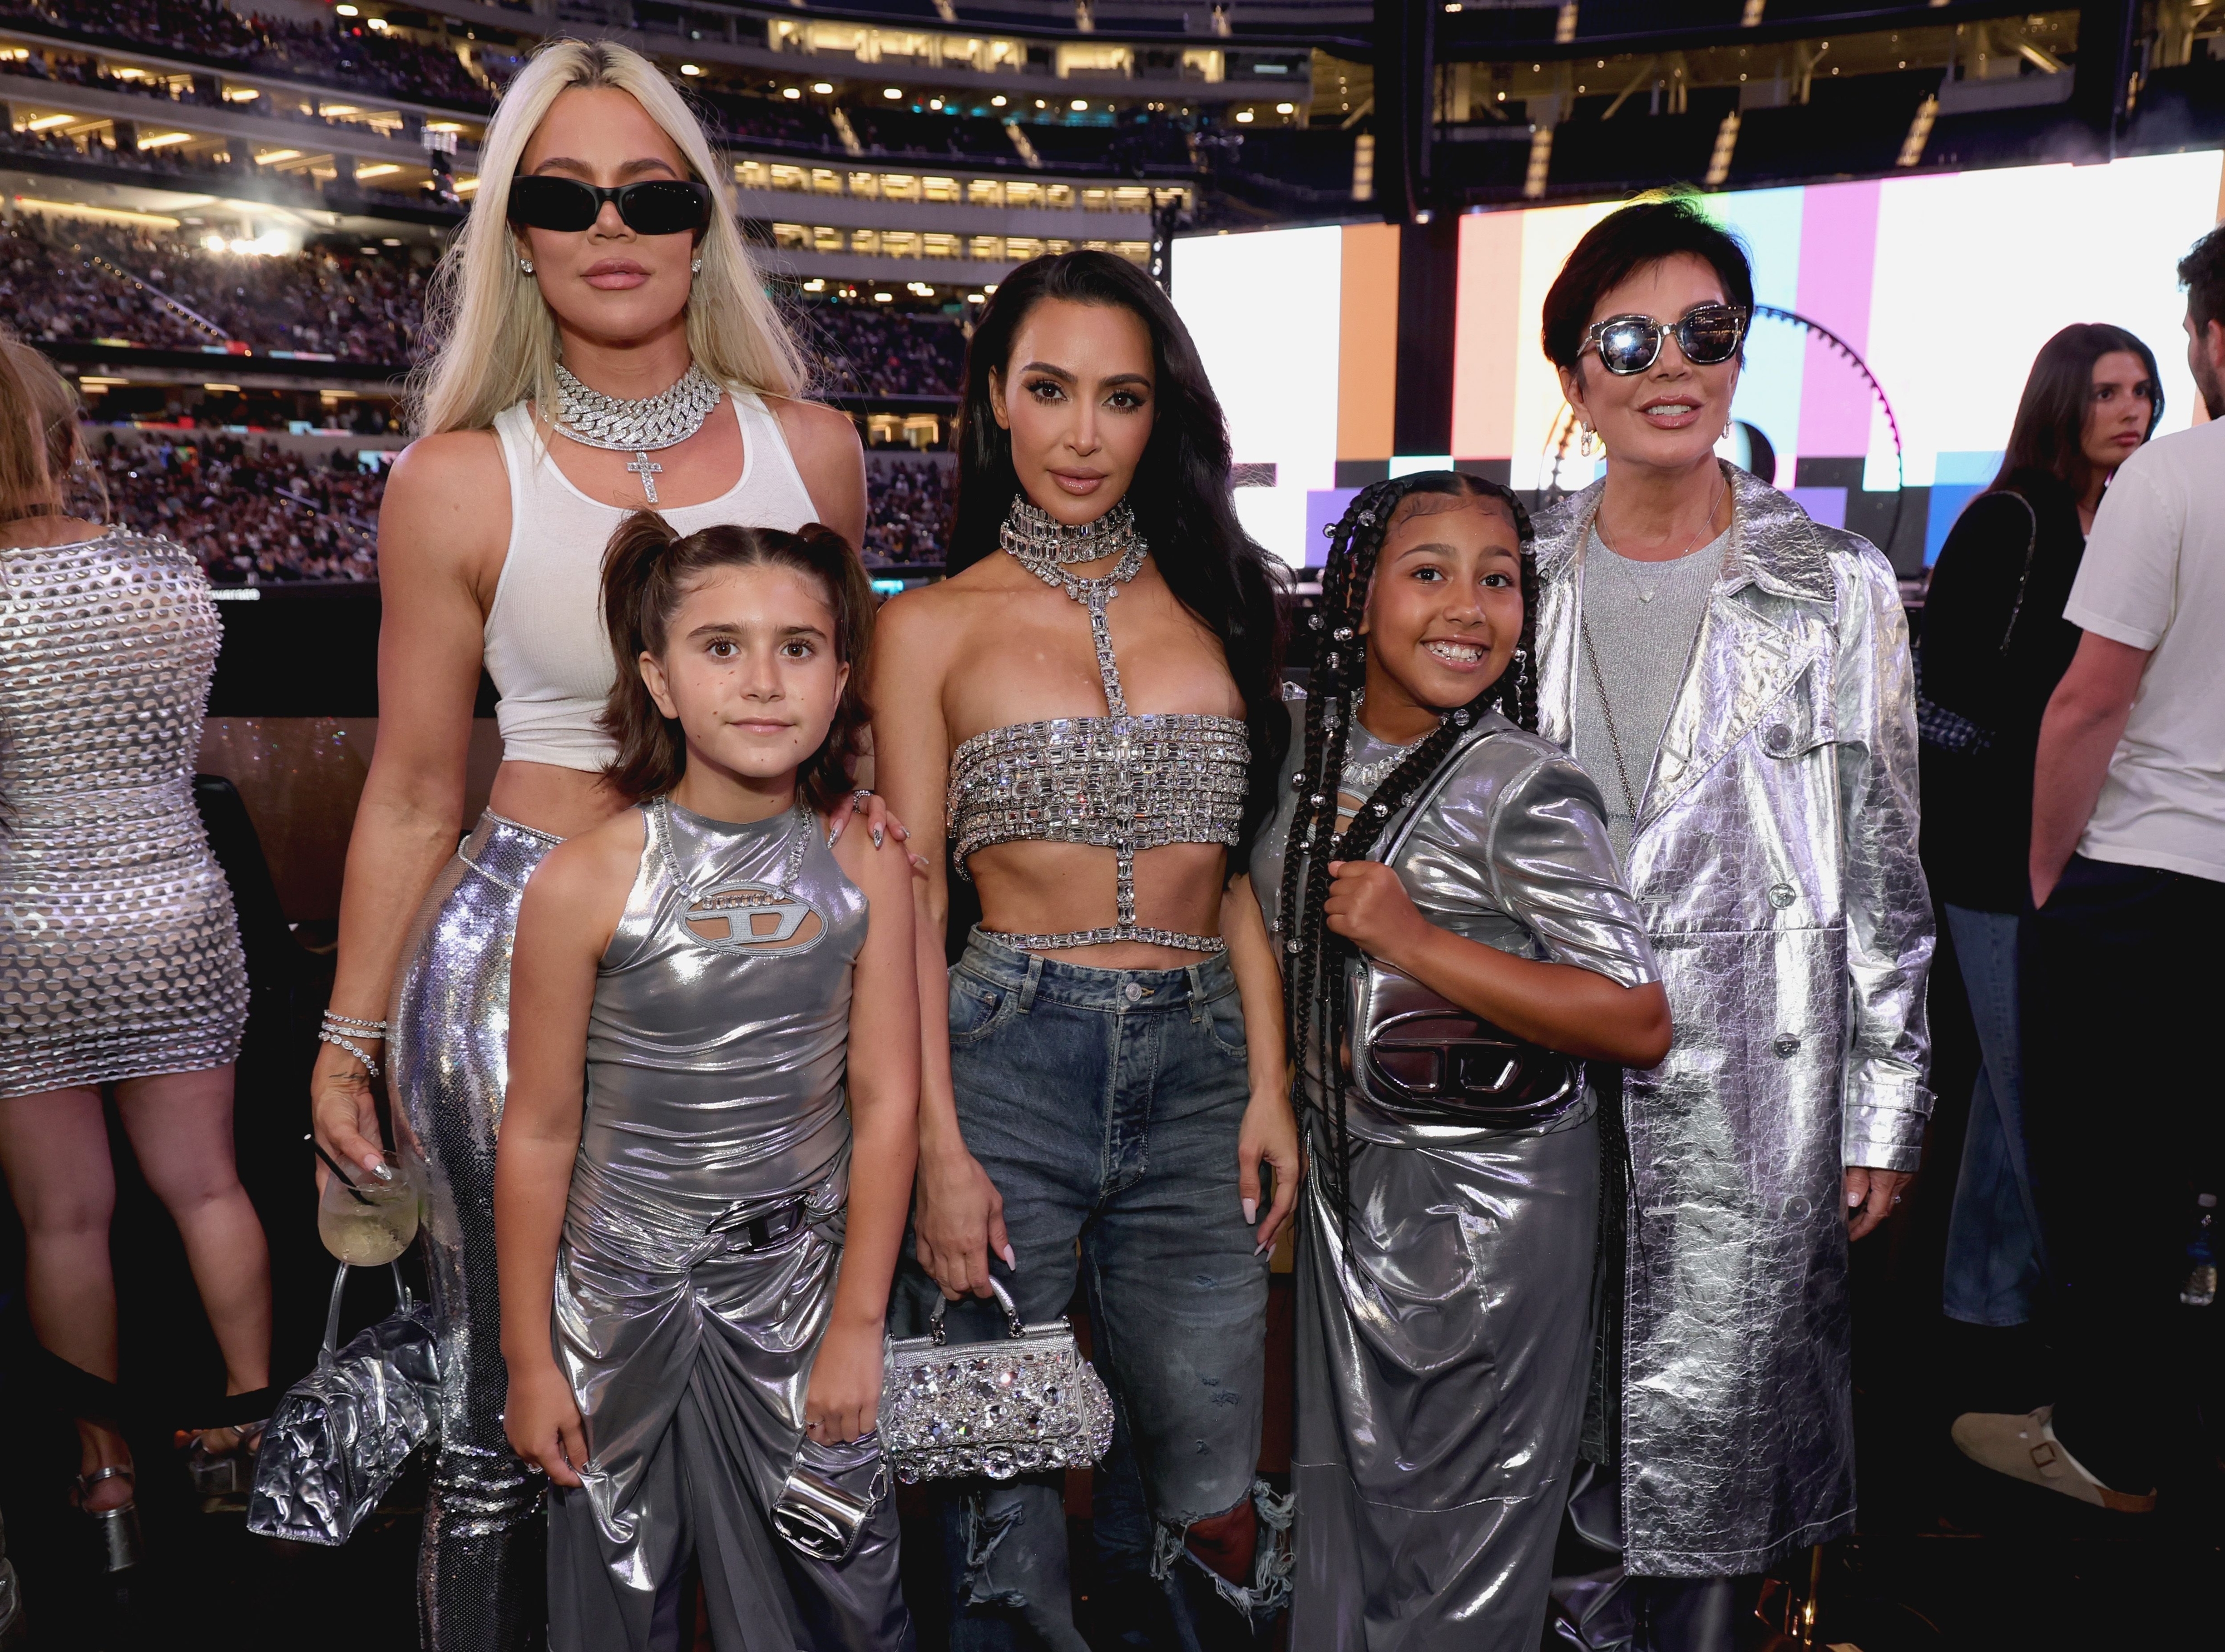 the Kardashian family in all silver outfits